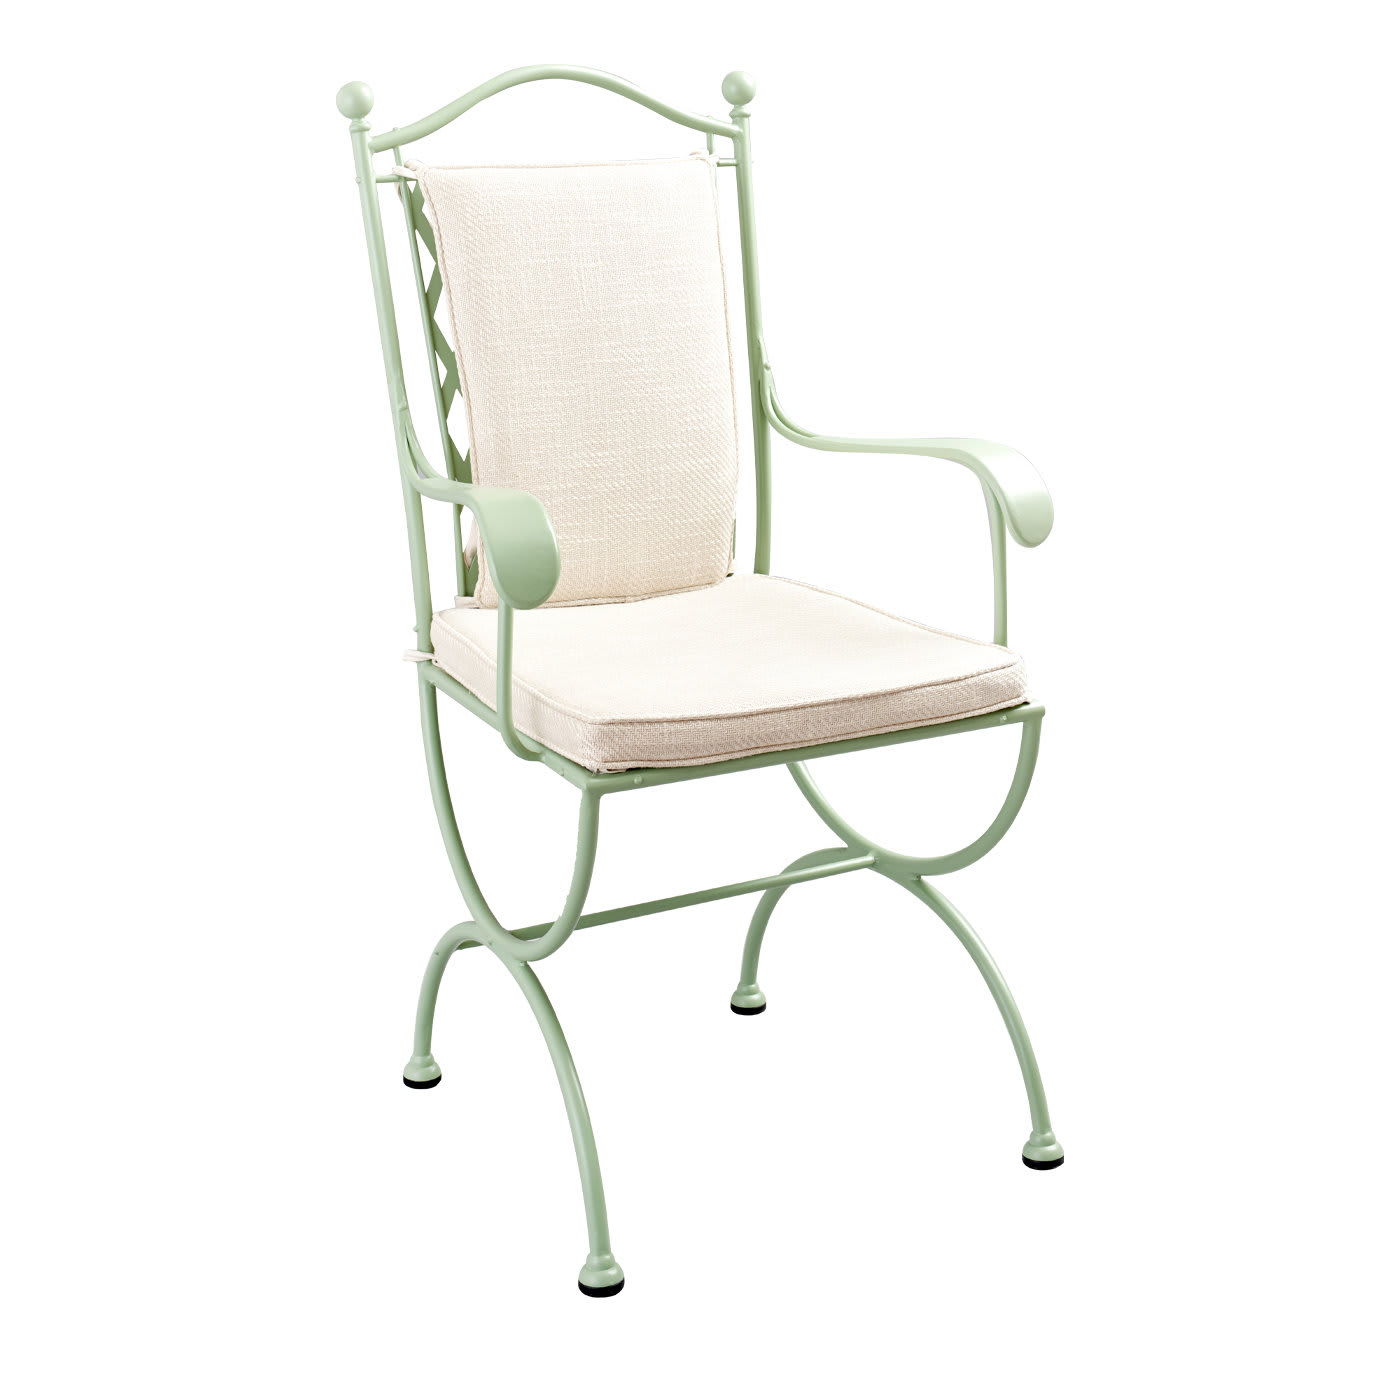 Rombi Outdoor Green Wrought Iron Chair with Armrests - Officina Ciani